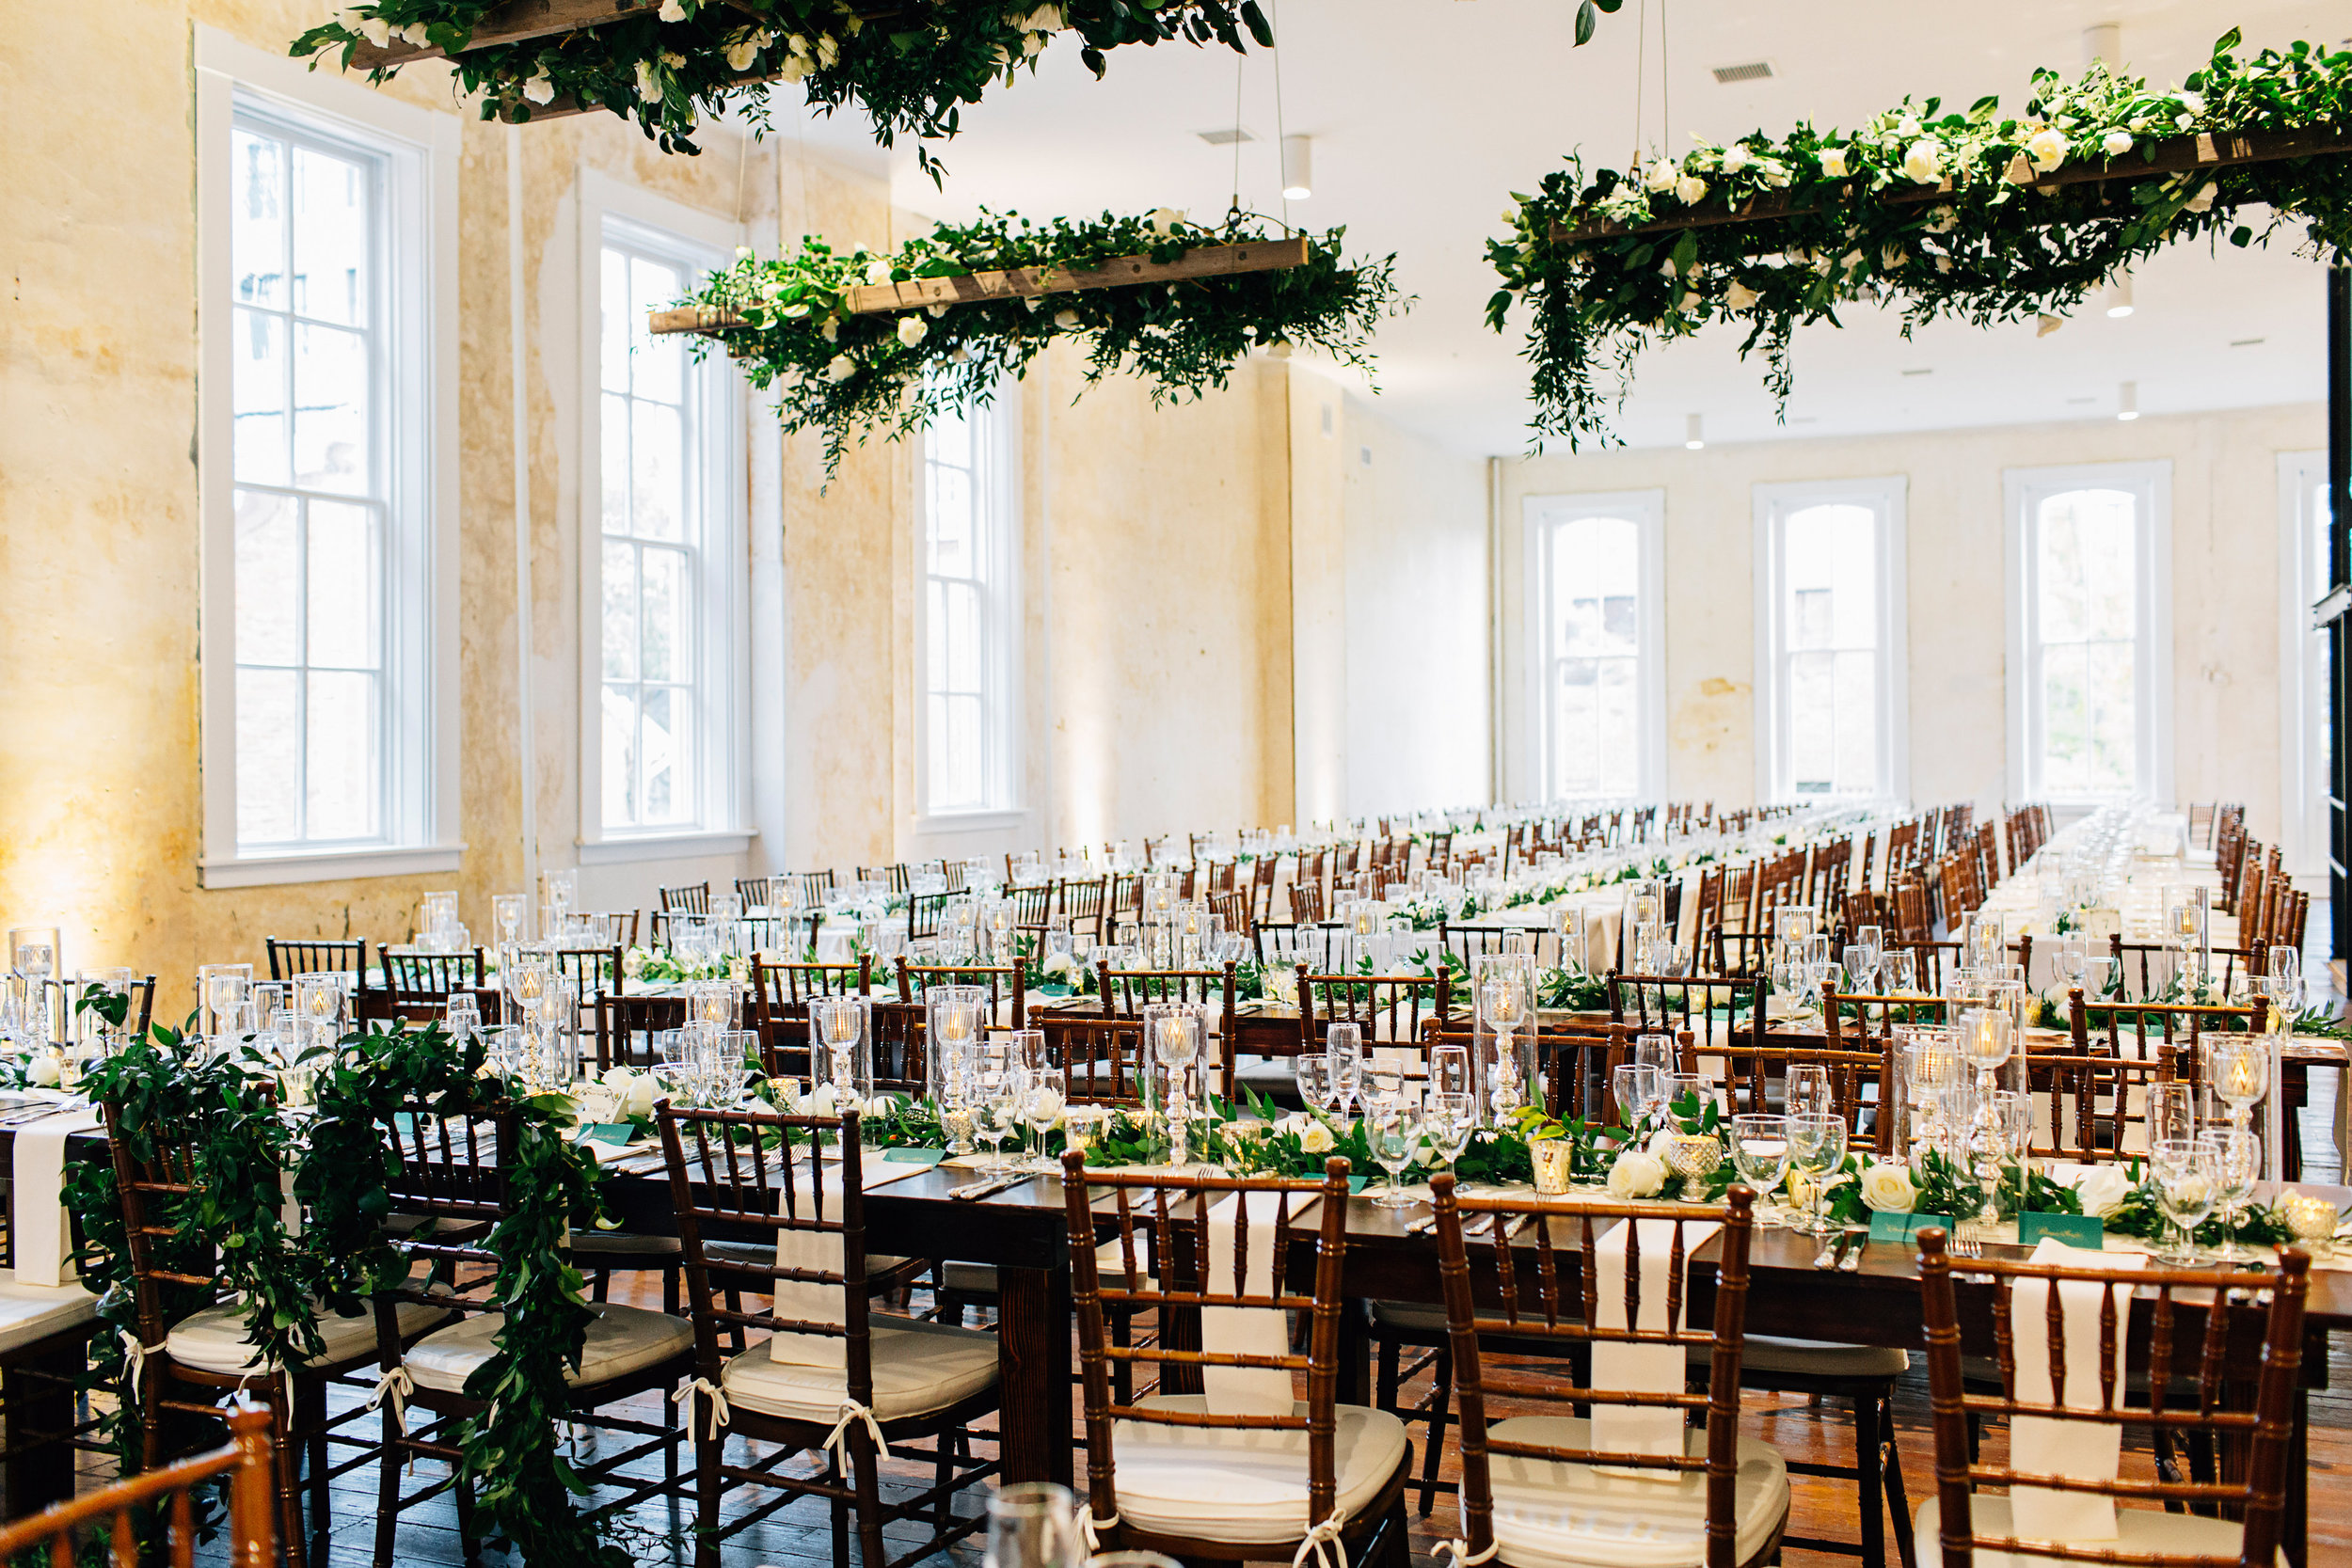 Wedding reception dinner tables with hanging greenery